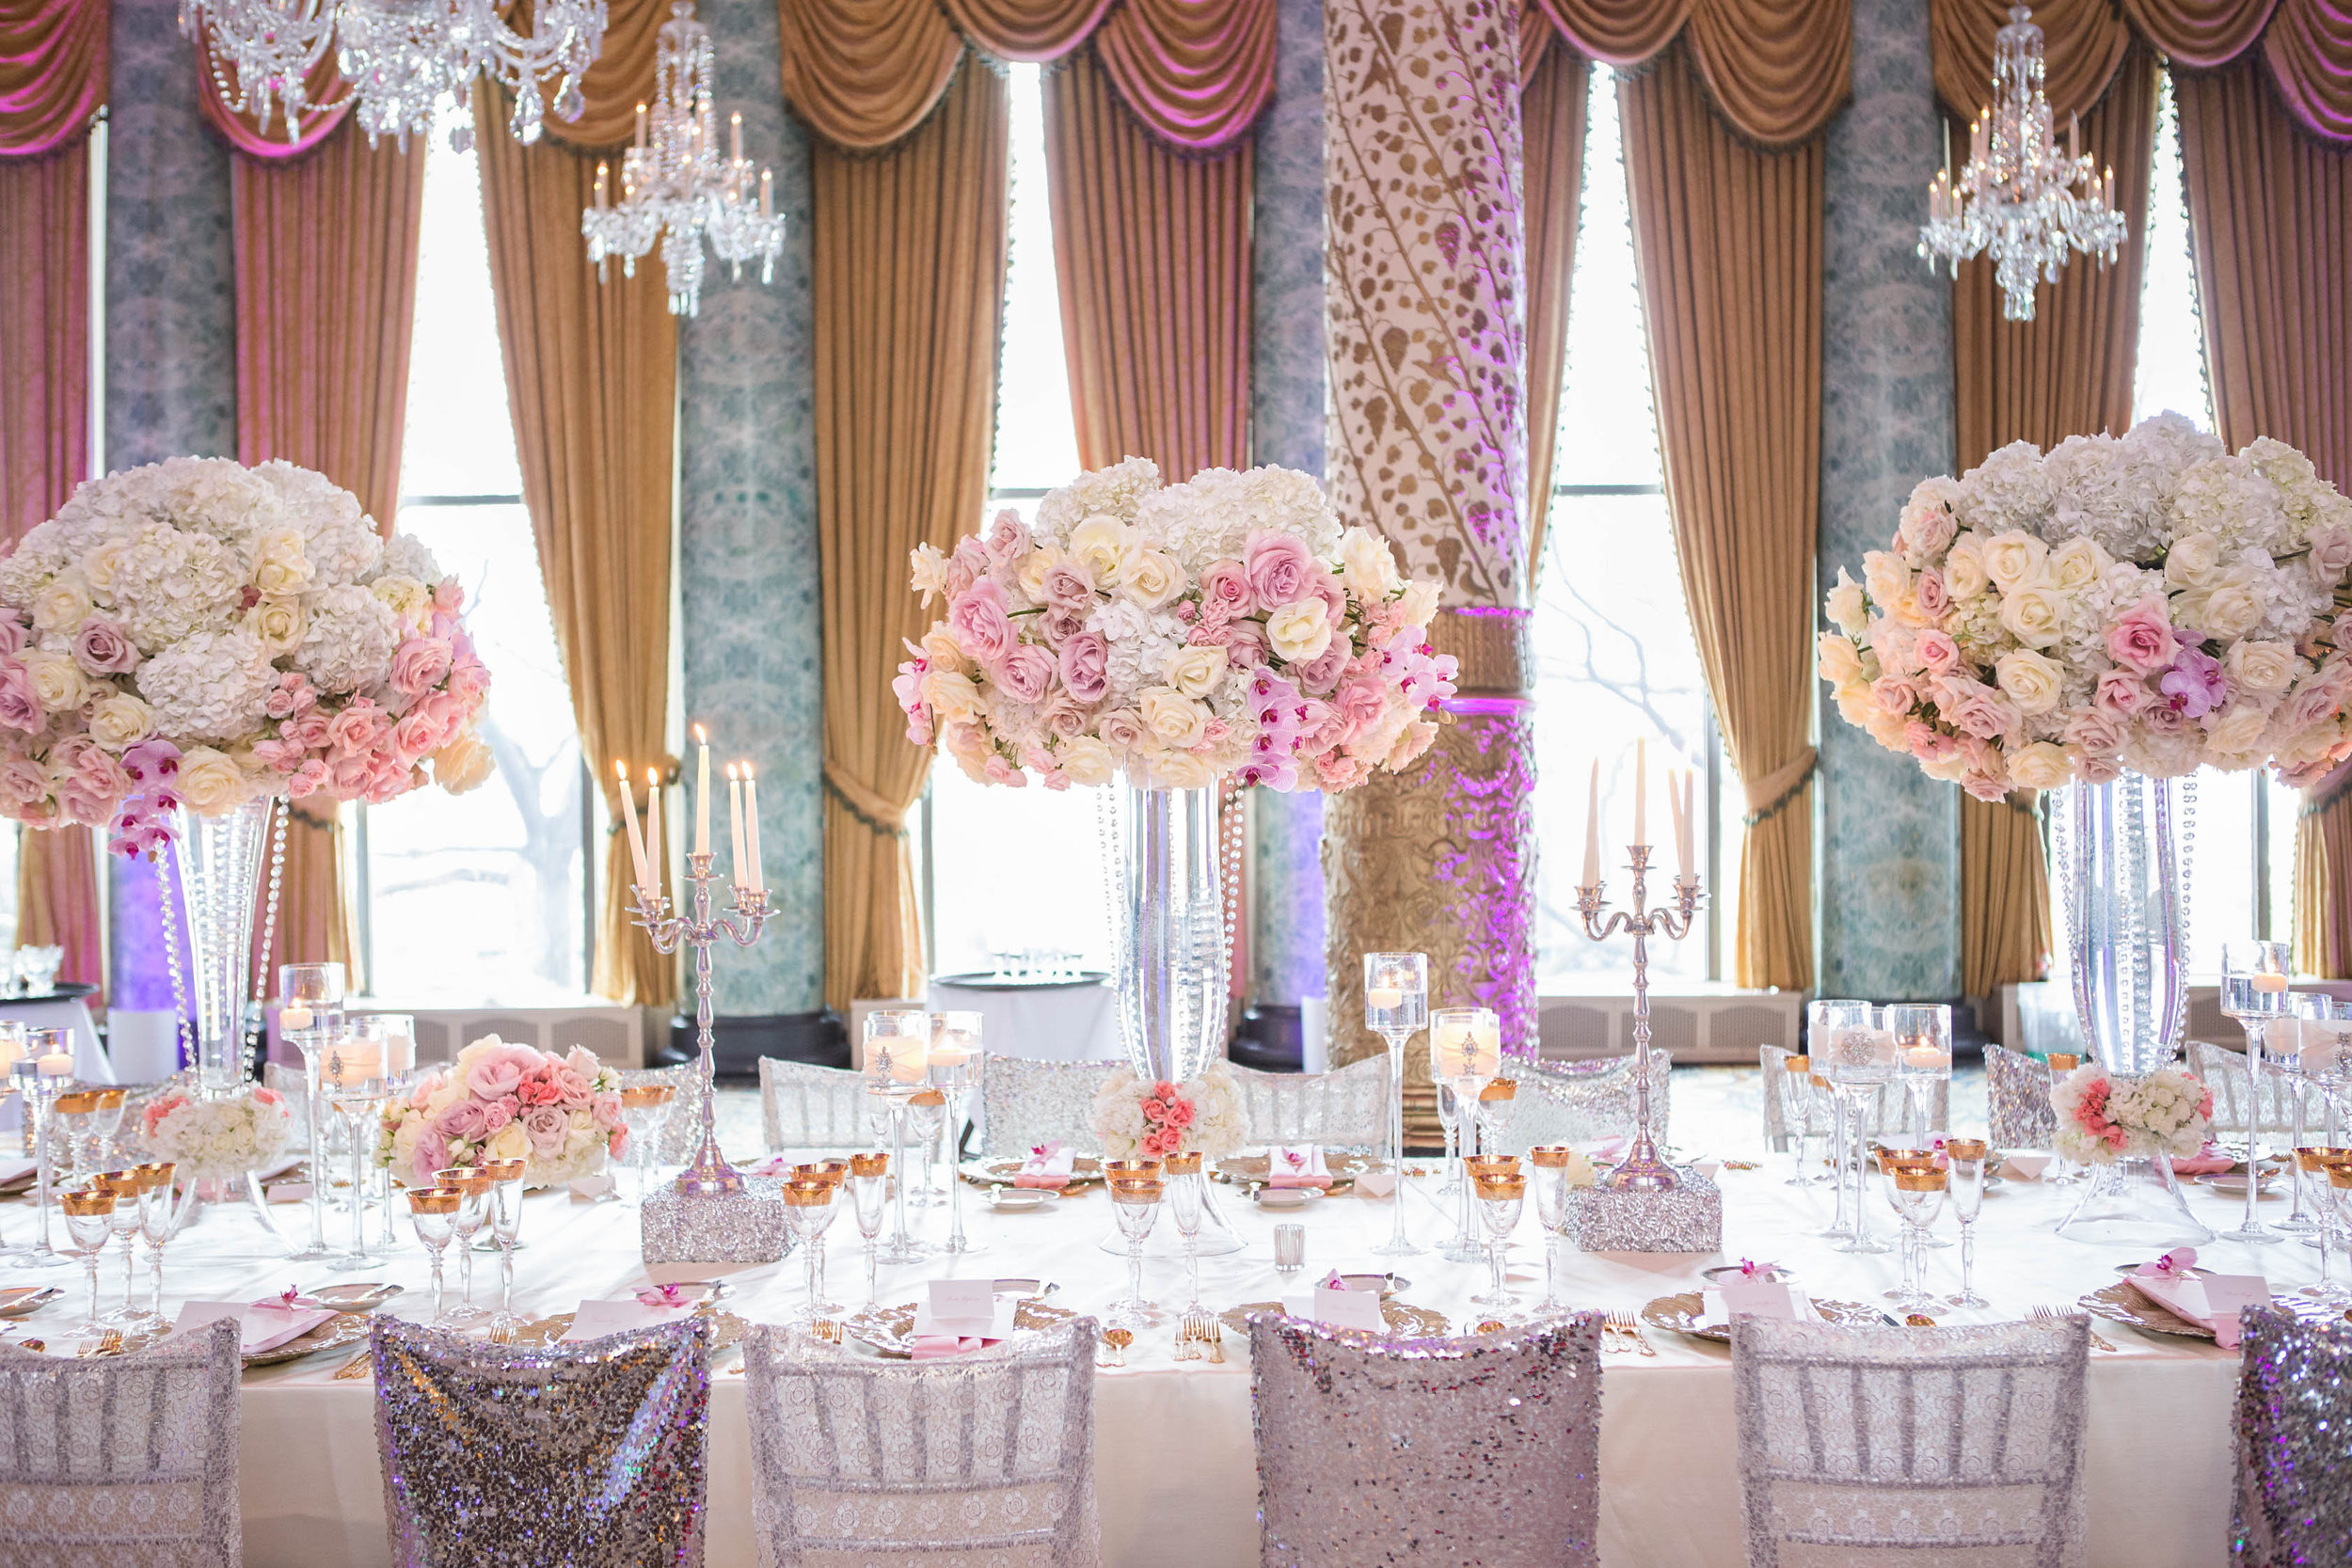 How To Decorate For A Wedding
 Wedding Ideas Long Reception Tables Belle The Magazine